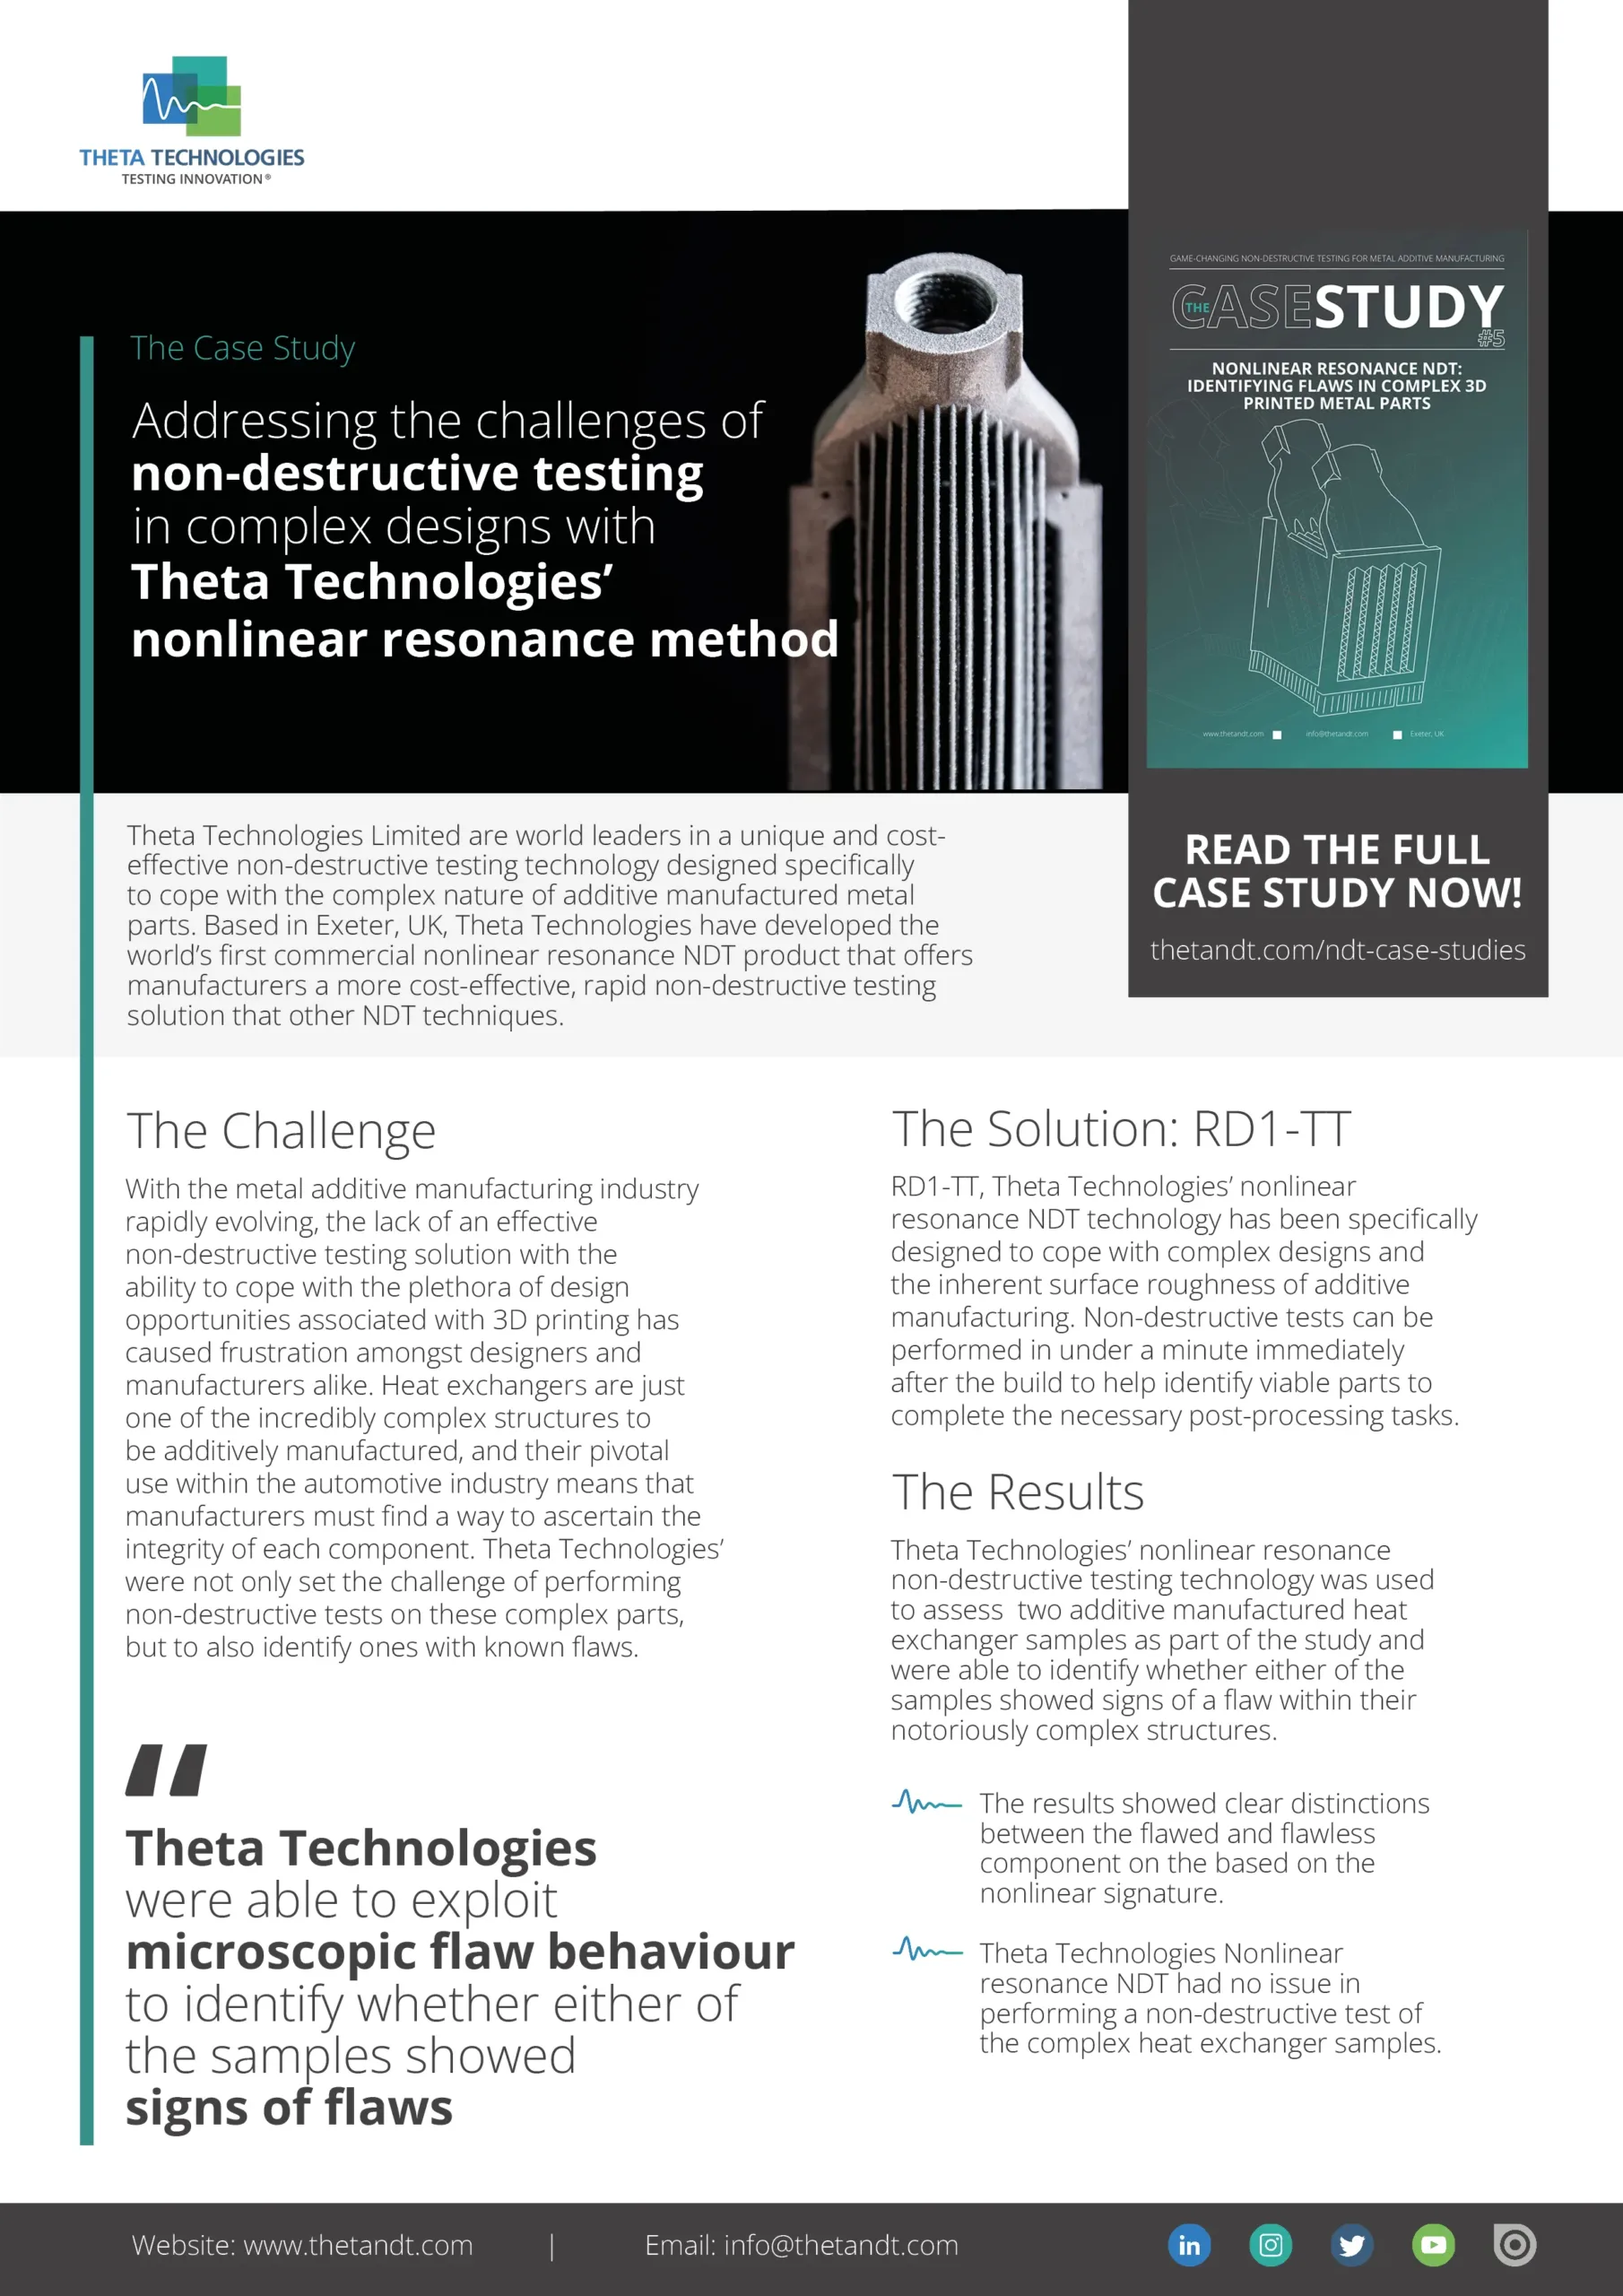 Theta Technologies nonlinear resonance non-destructive testing solution for additive manufacturing - case study issue 5